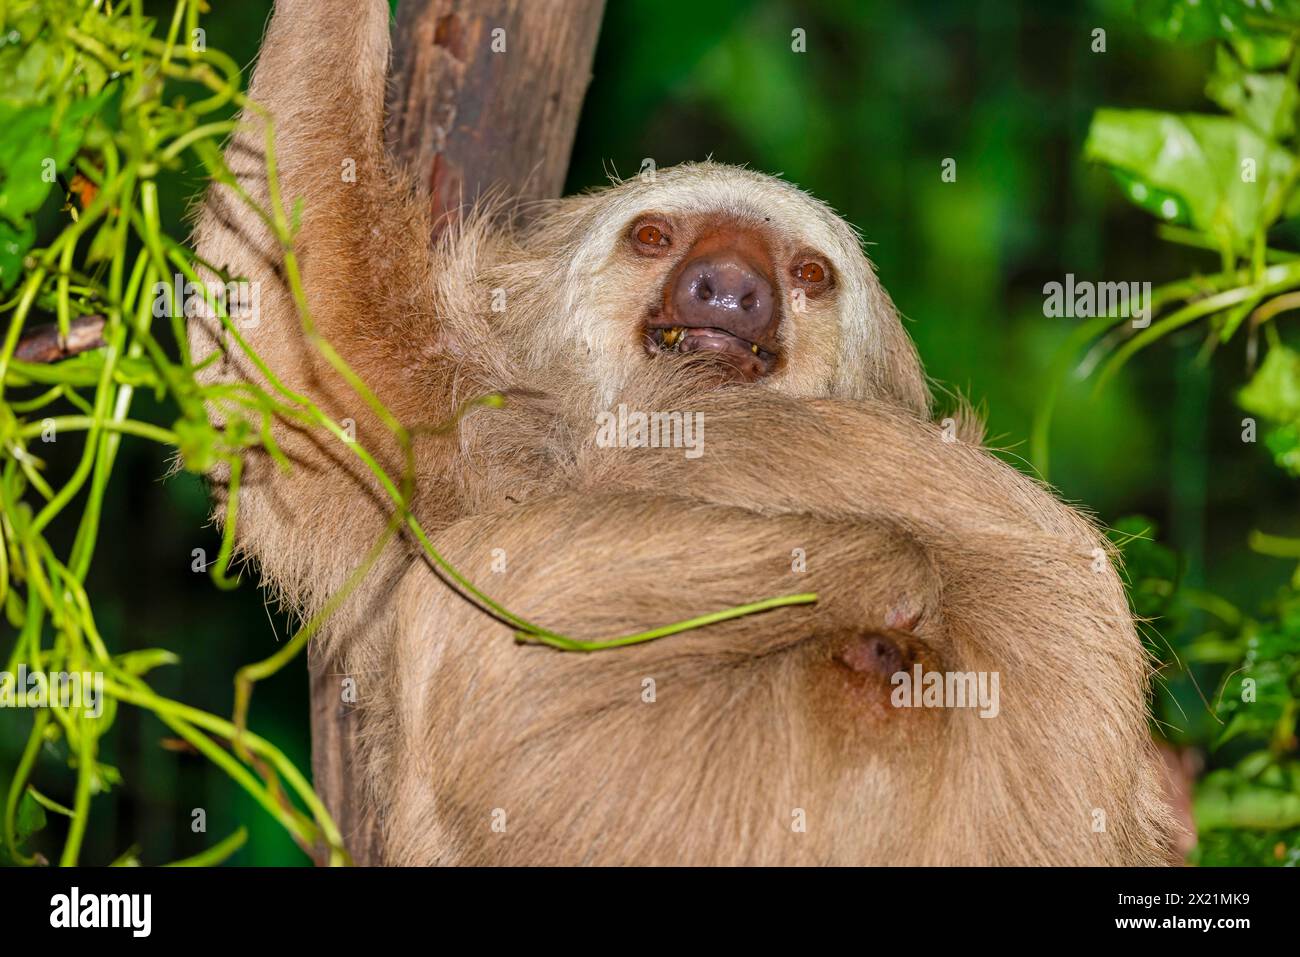 Hoffmann's two-toed sloth, Northern two-toed sloth (Choloepus hoffmanni), lying on a tree, Costa Rica, Alajuela, La Paz Waterfall Gardens Stock Photo